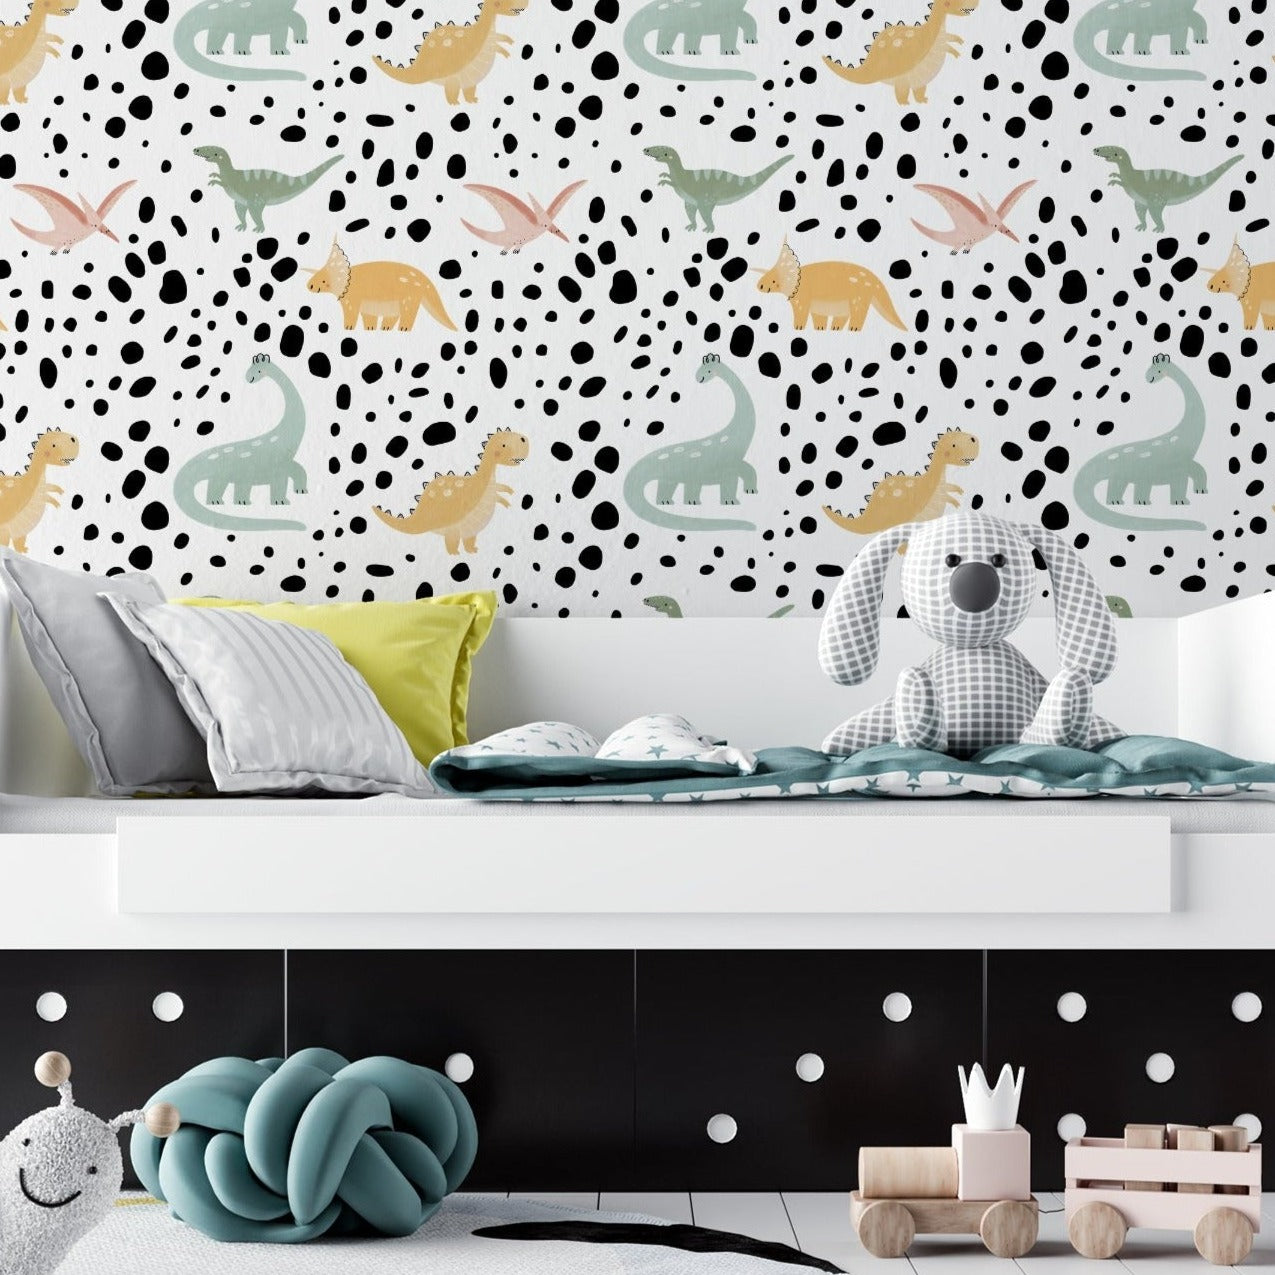 Children's room featuring a wall covered in 'Dino World Kids Wallpaper III' with pastel-colored dinosaur illustrations and black speckles on a white background. The room includes a grey bed with pillows, a plush grey dog toy, and various children's toys on the floor.